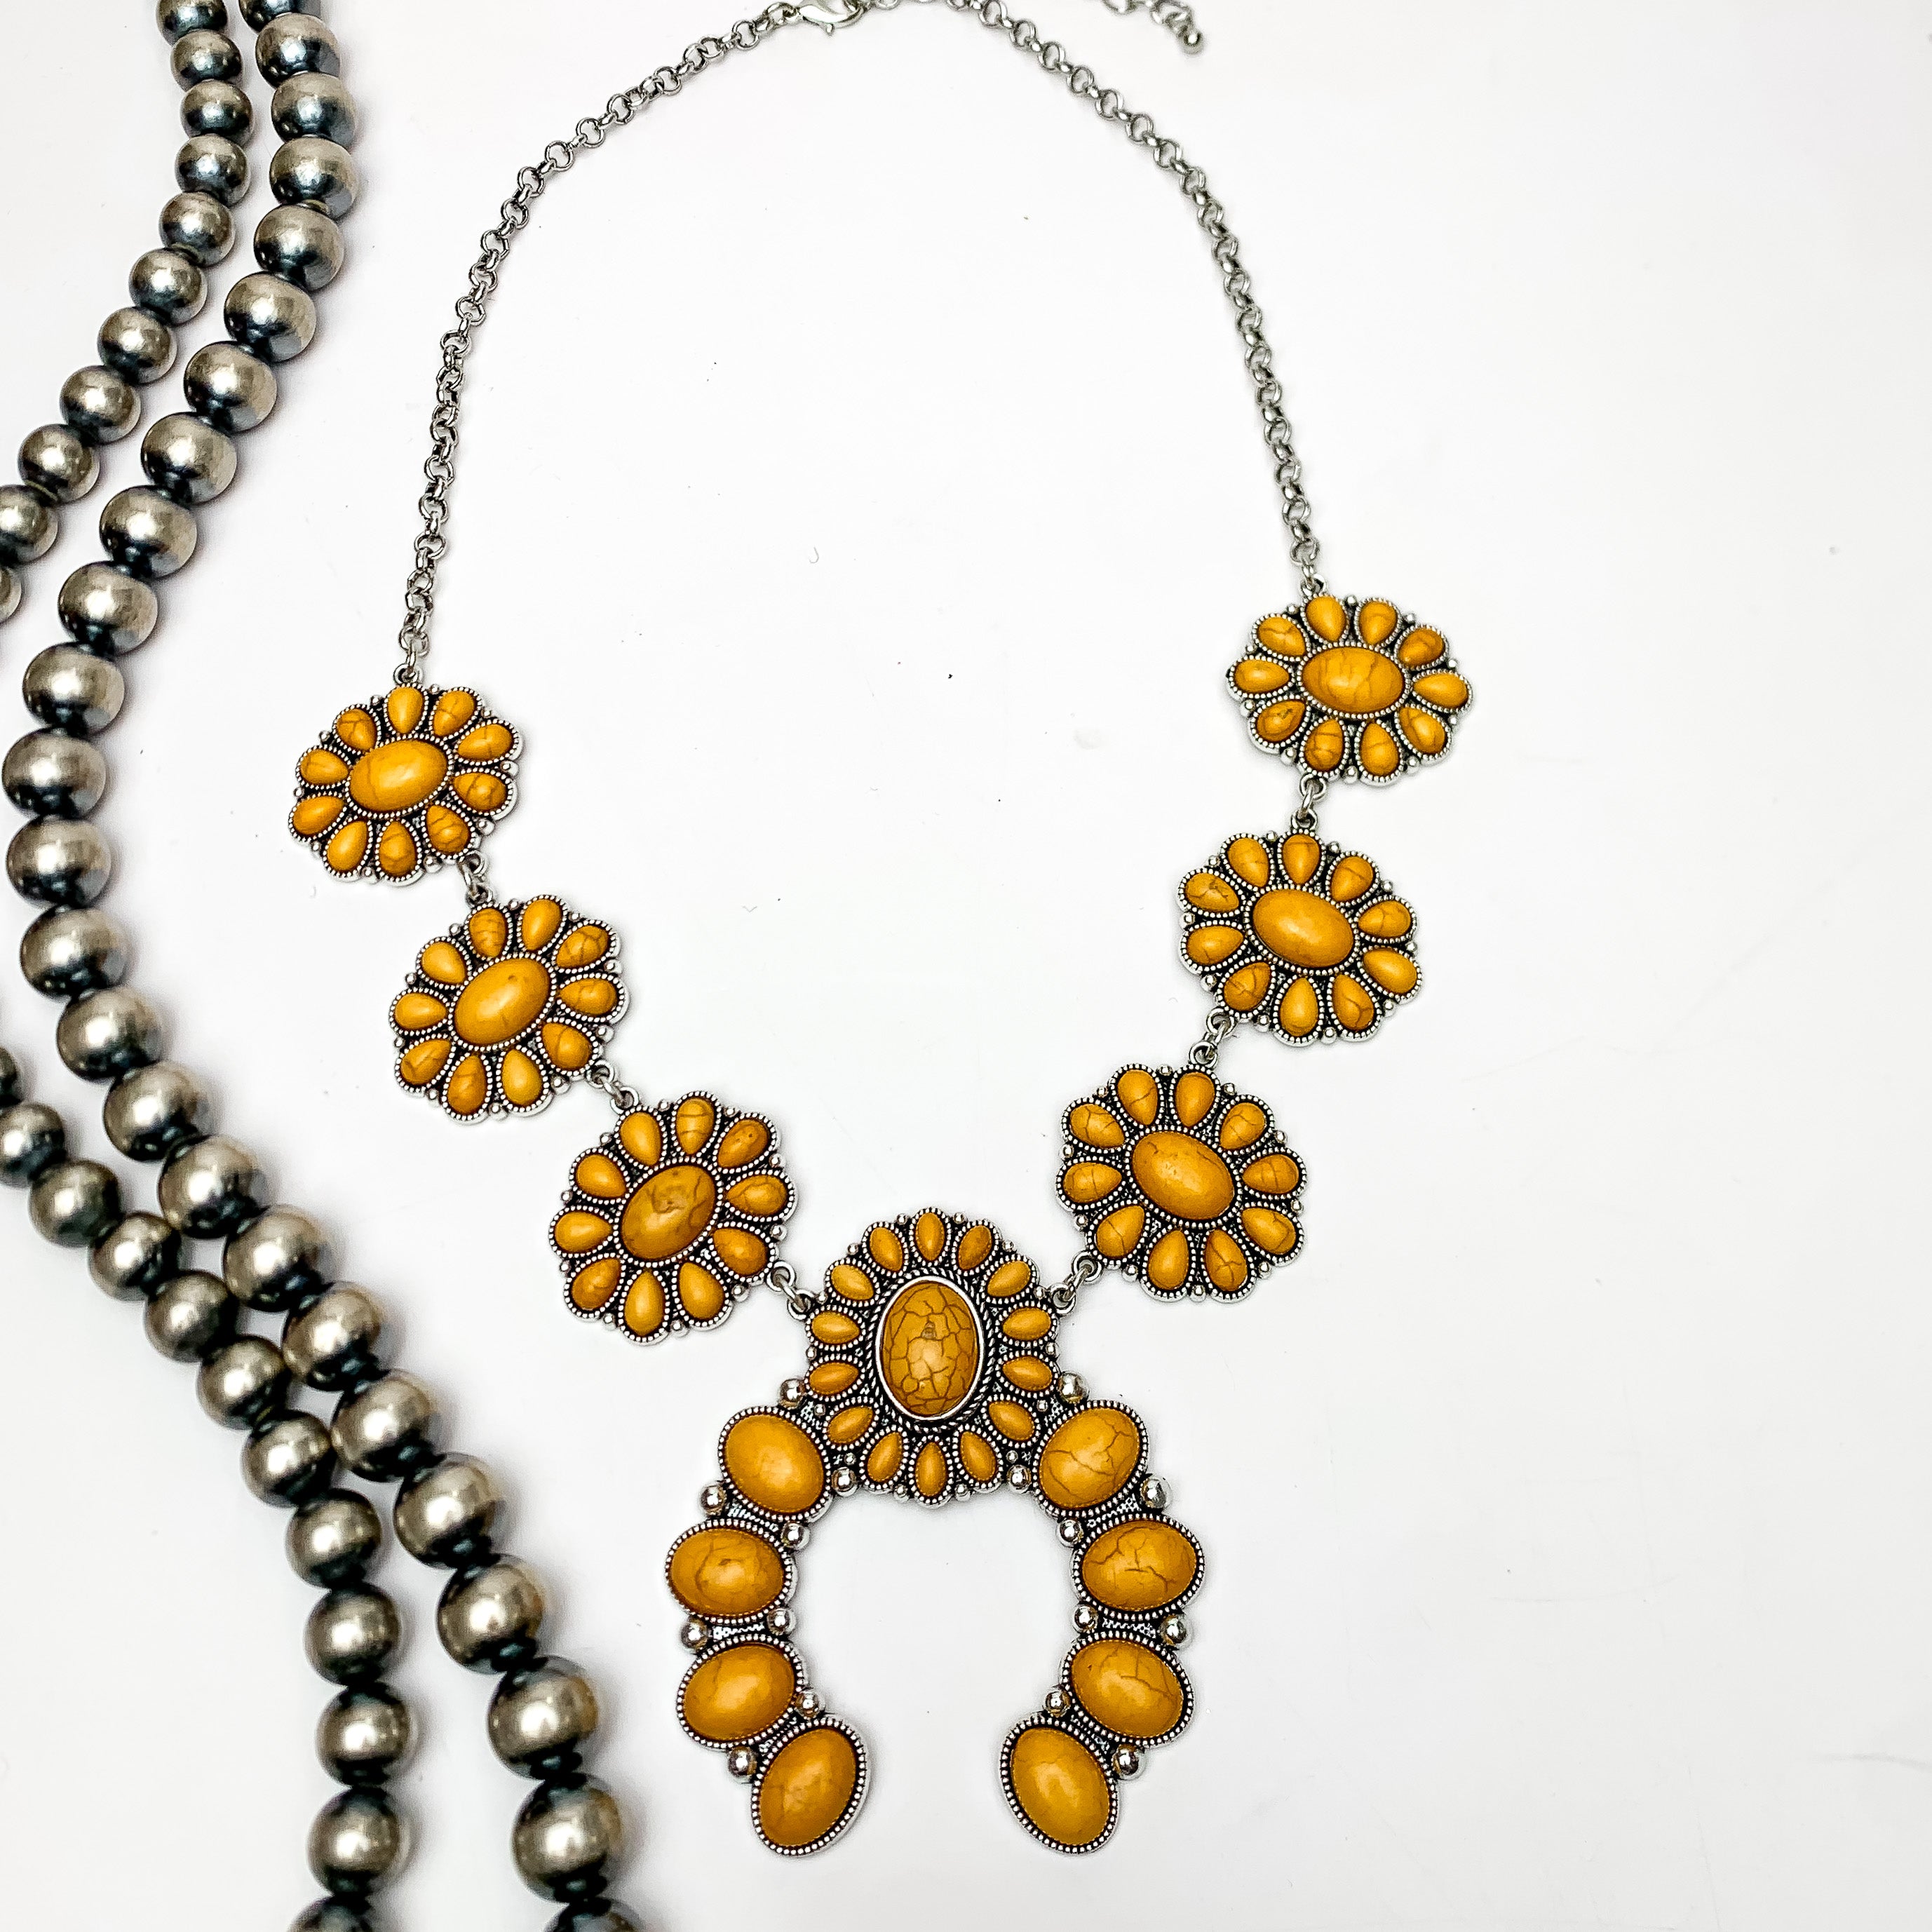 The Western Way Squash Blossom Necklace in Yellow. This necklace is pictured on a white background with beads on the left side.